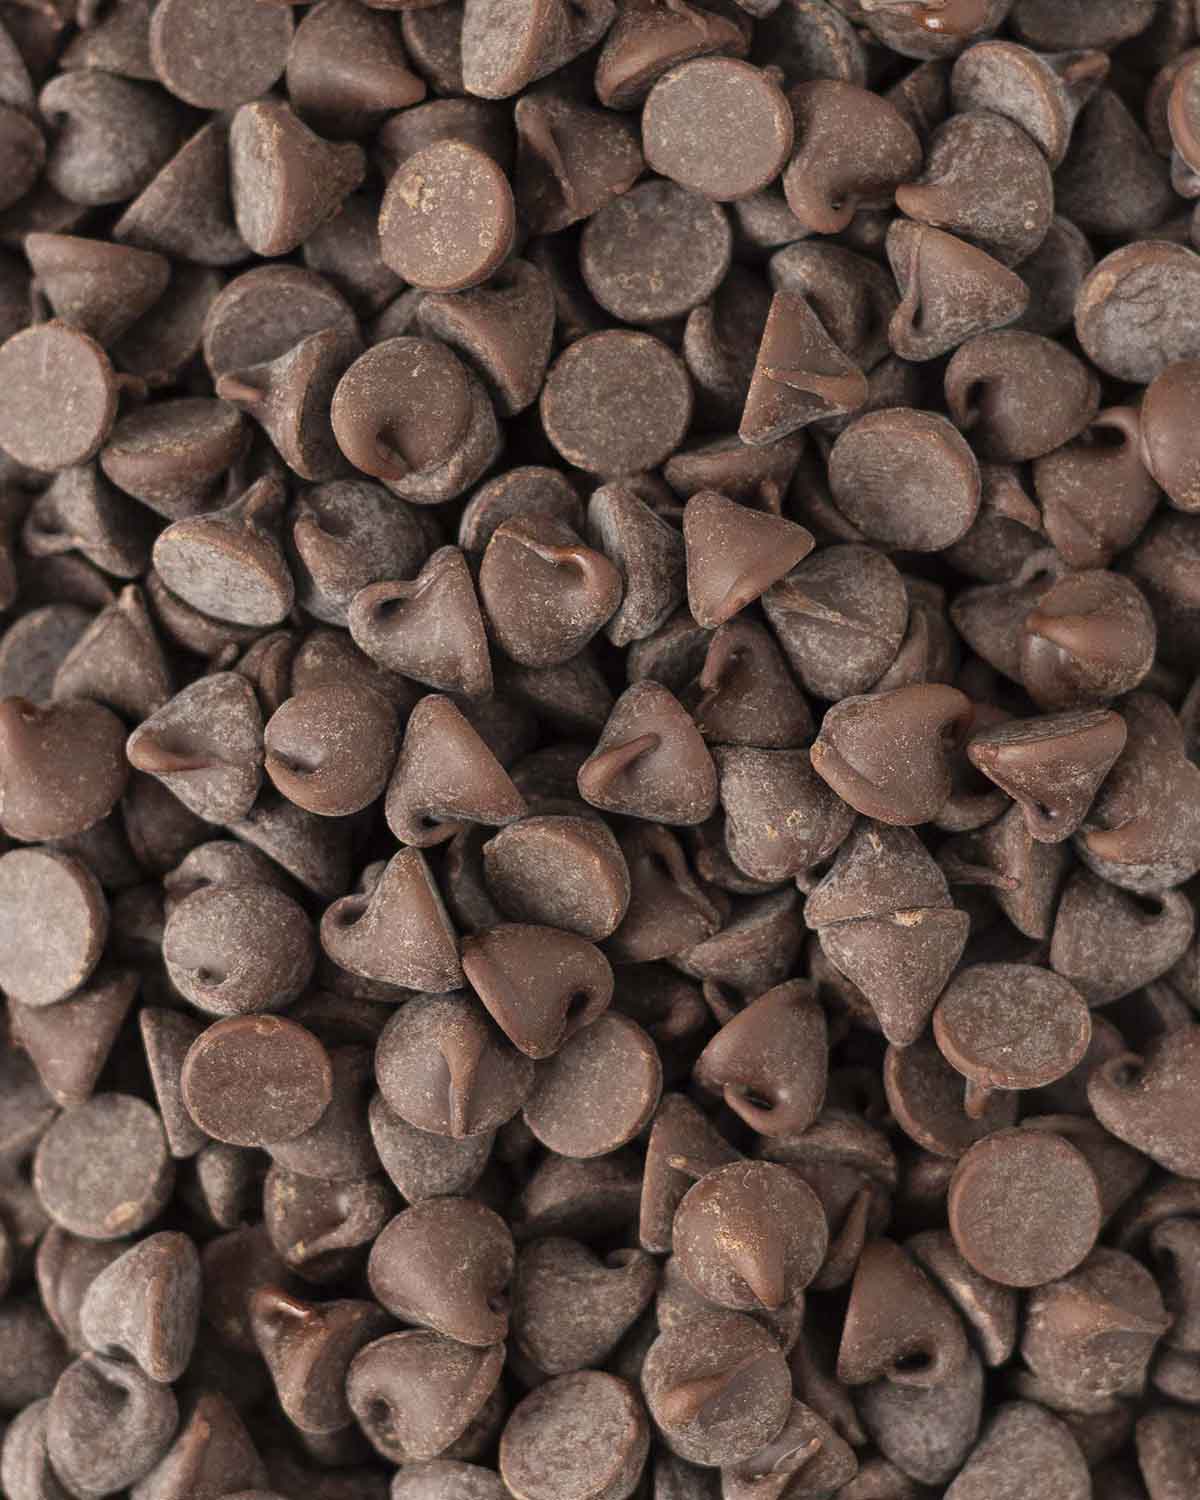 A pile of chocolate chips.